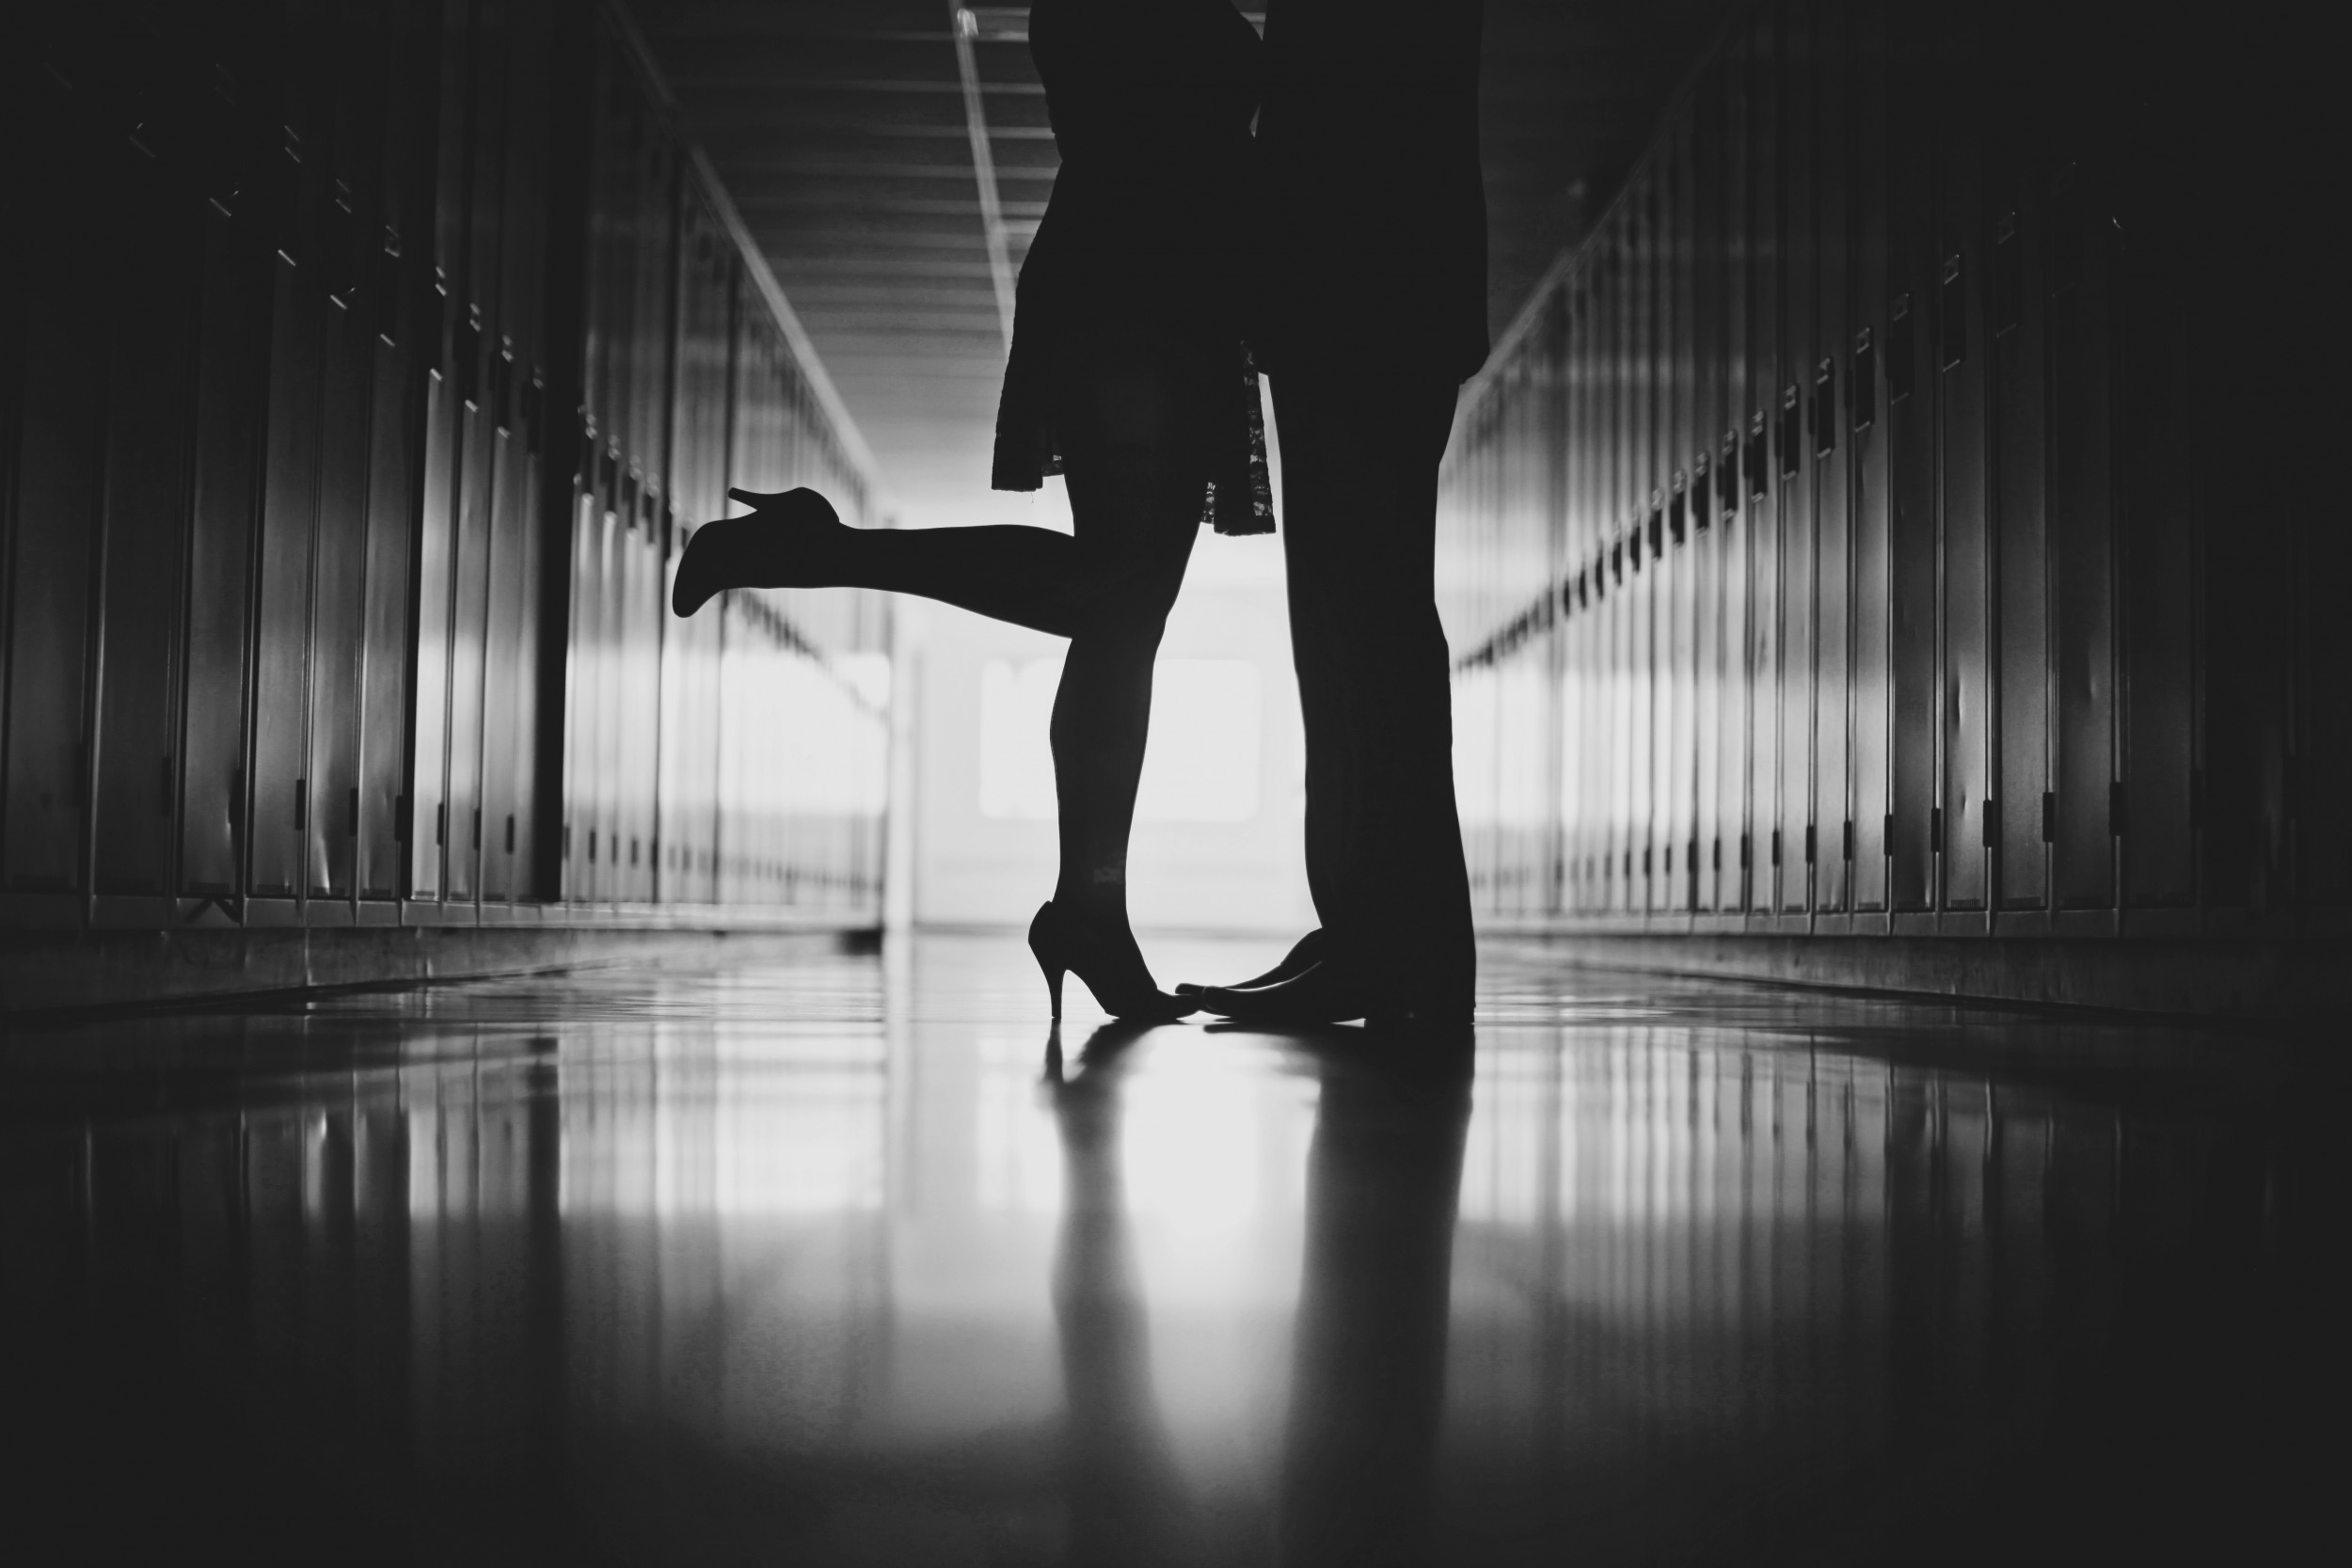 Sax School Voides - Video Shows Students Having Sex in Maryland Classroom, School and Police  Investigate